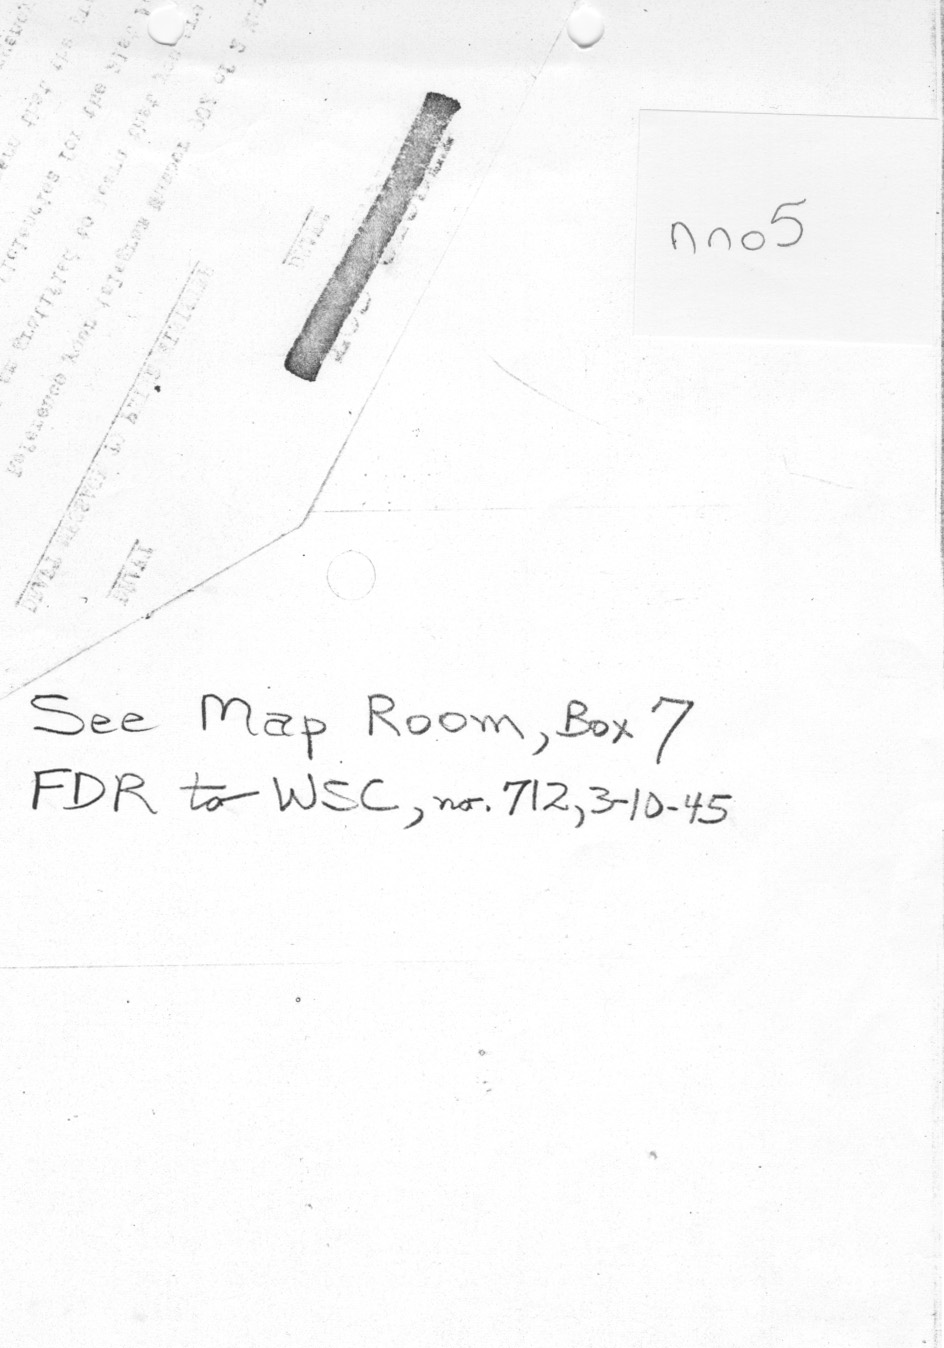 [a335nn05.jpg] - Note: See map room box 7 FDR to WSC, no.712